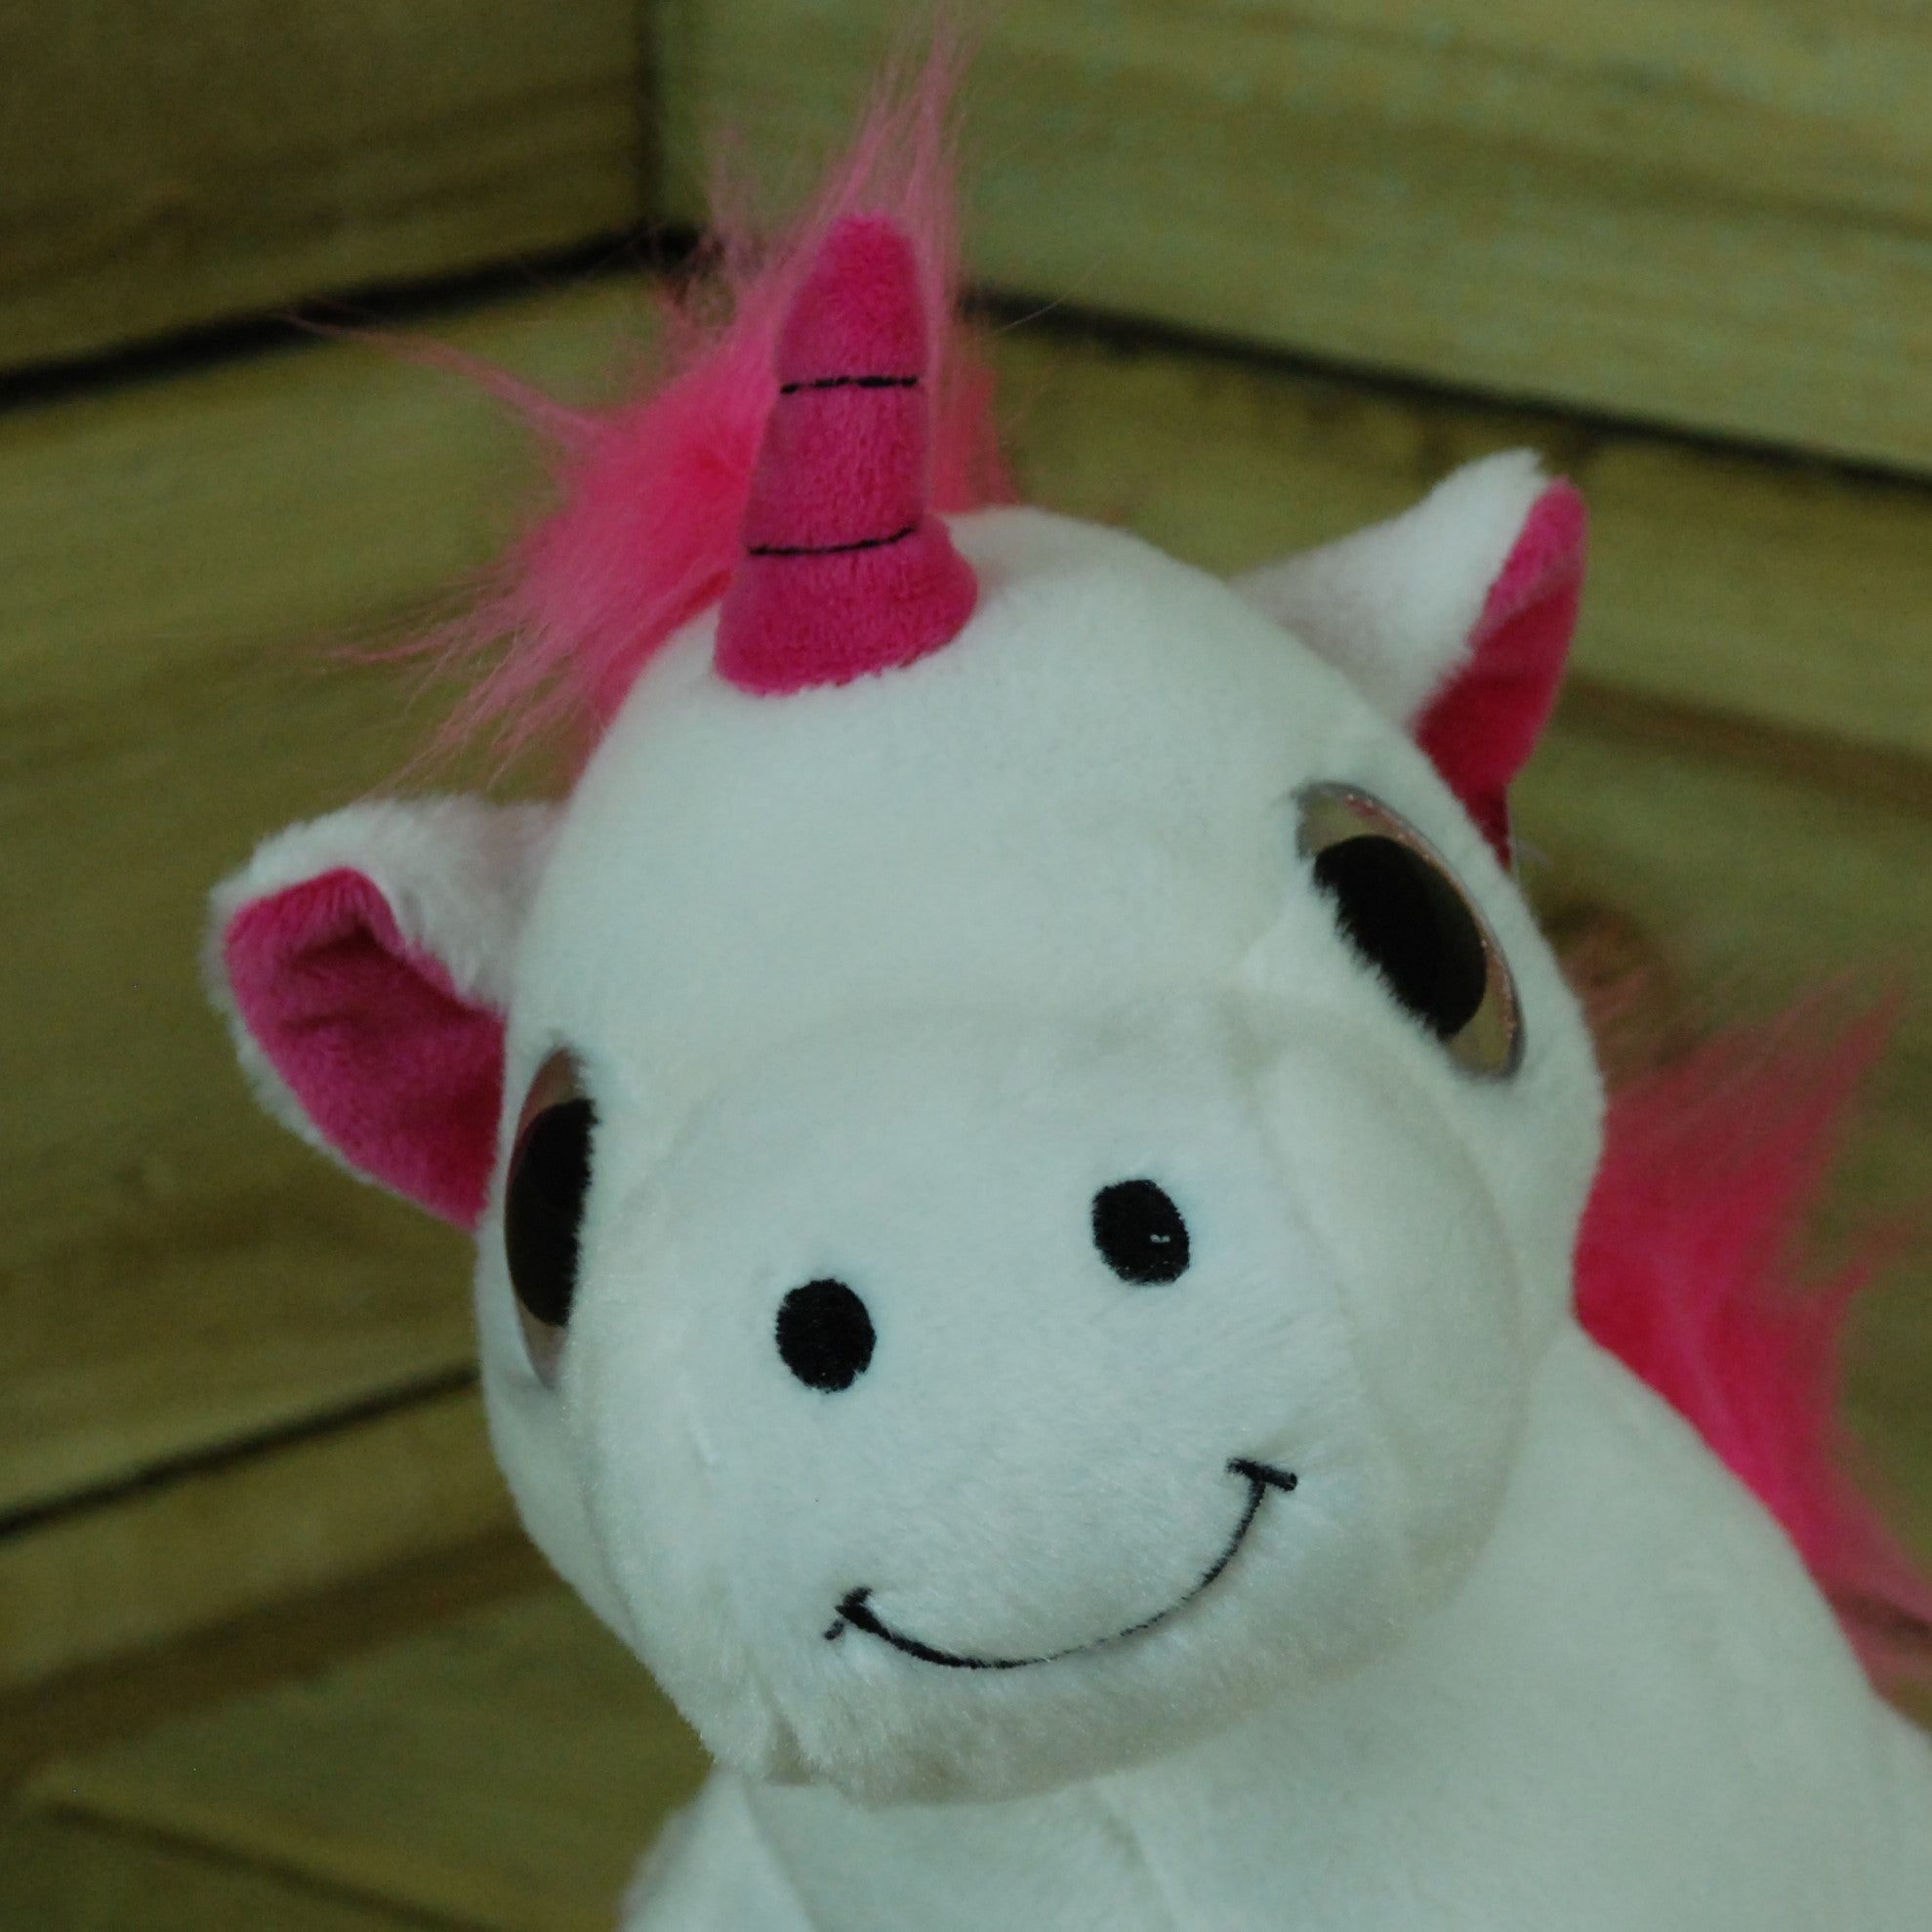 25cm Plush White Unicorn with Pink Mane and Tail